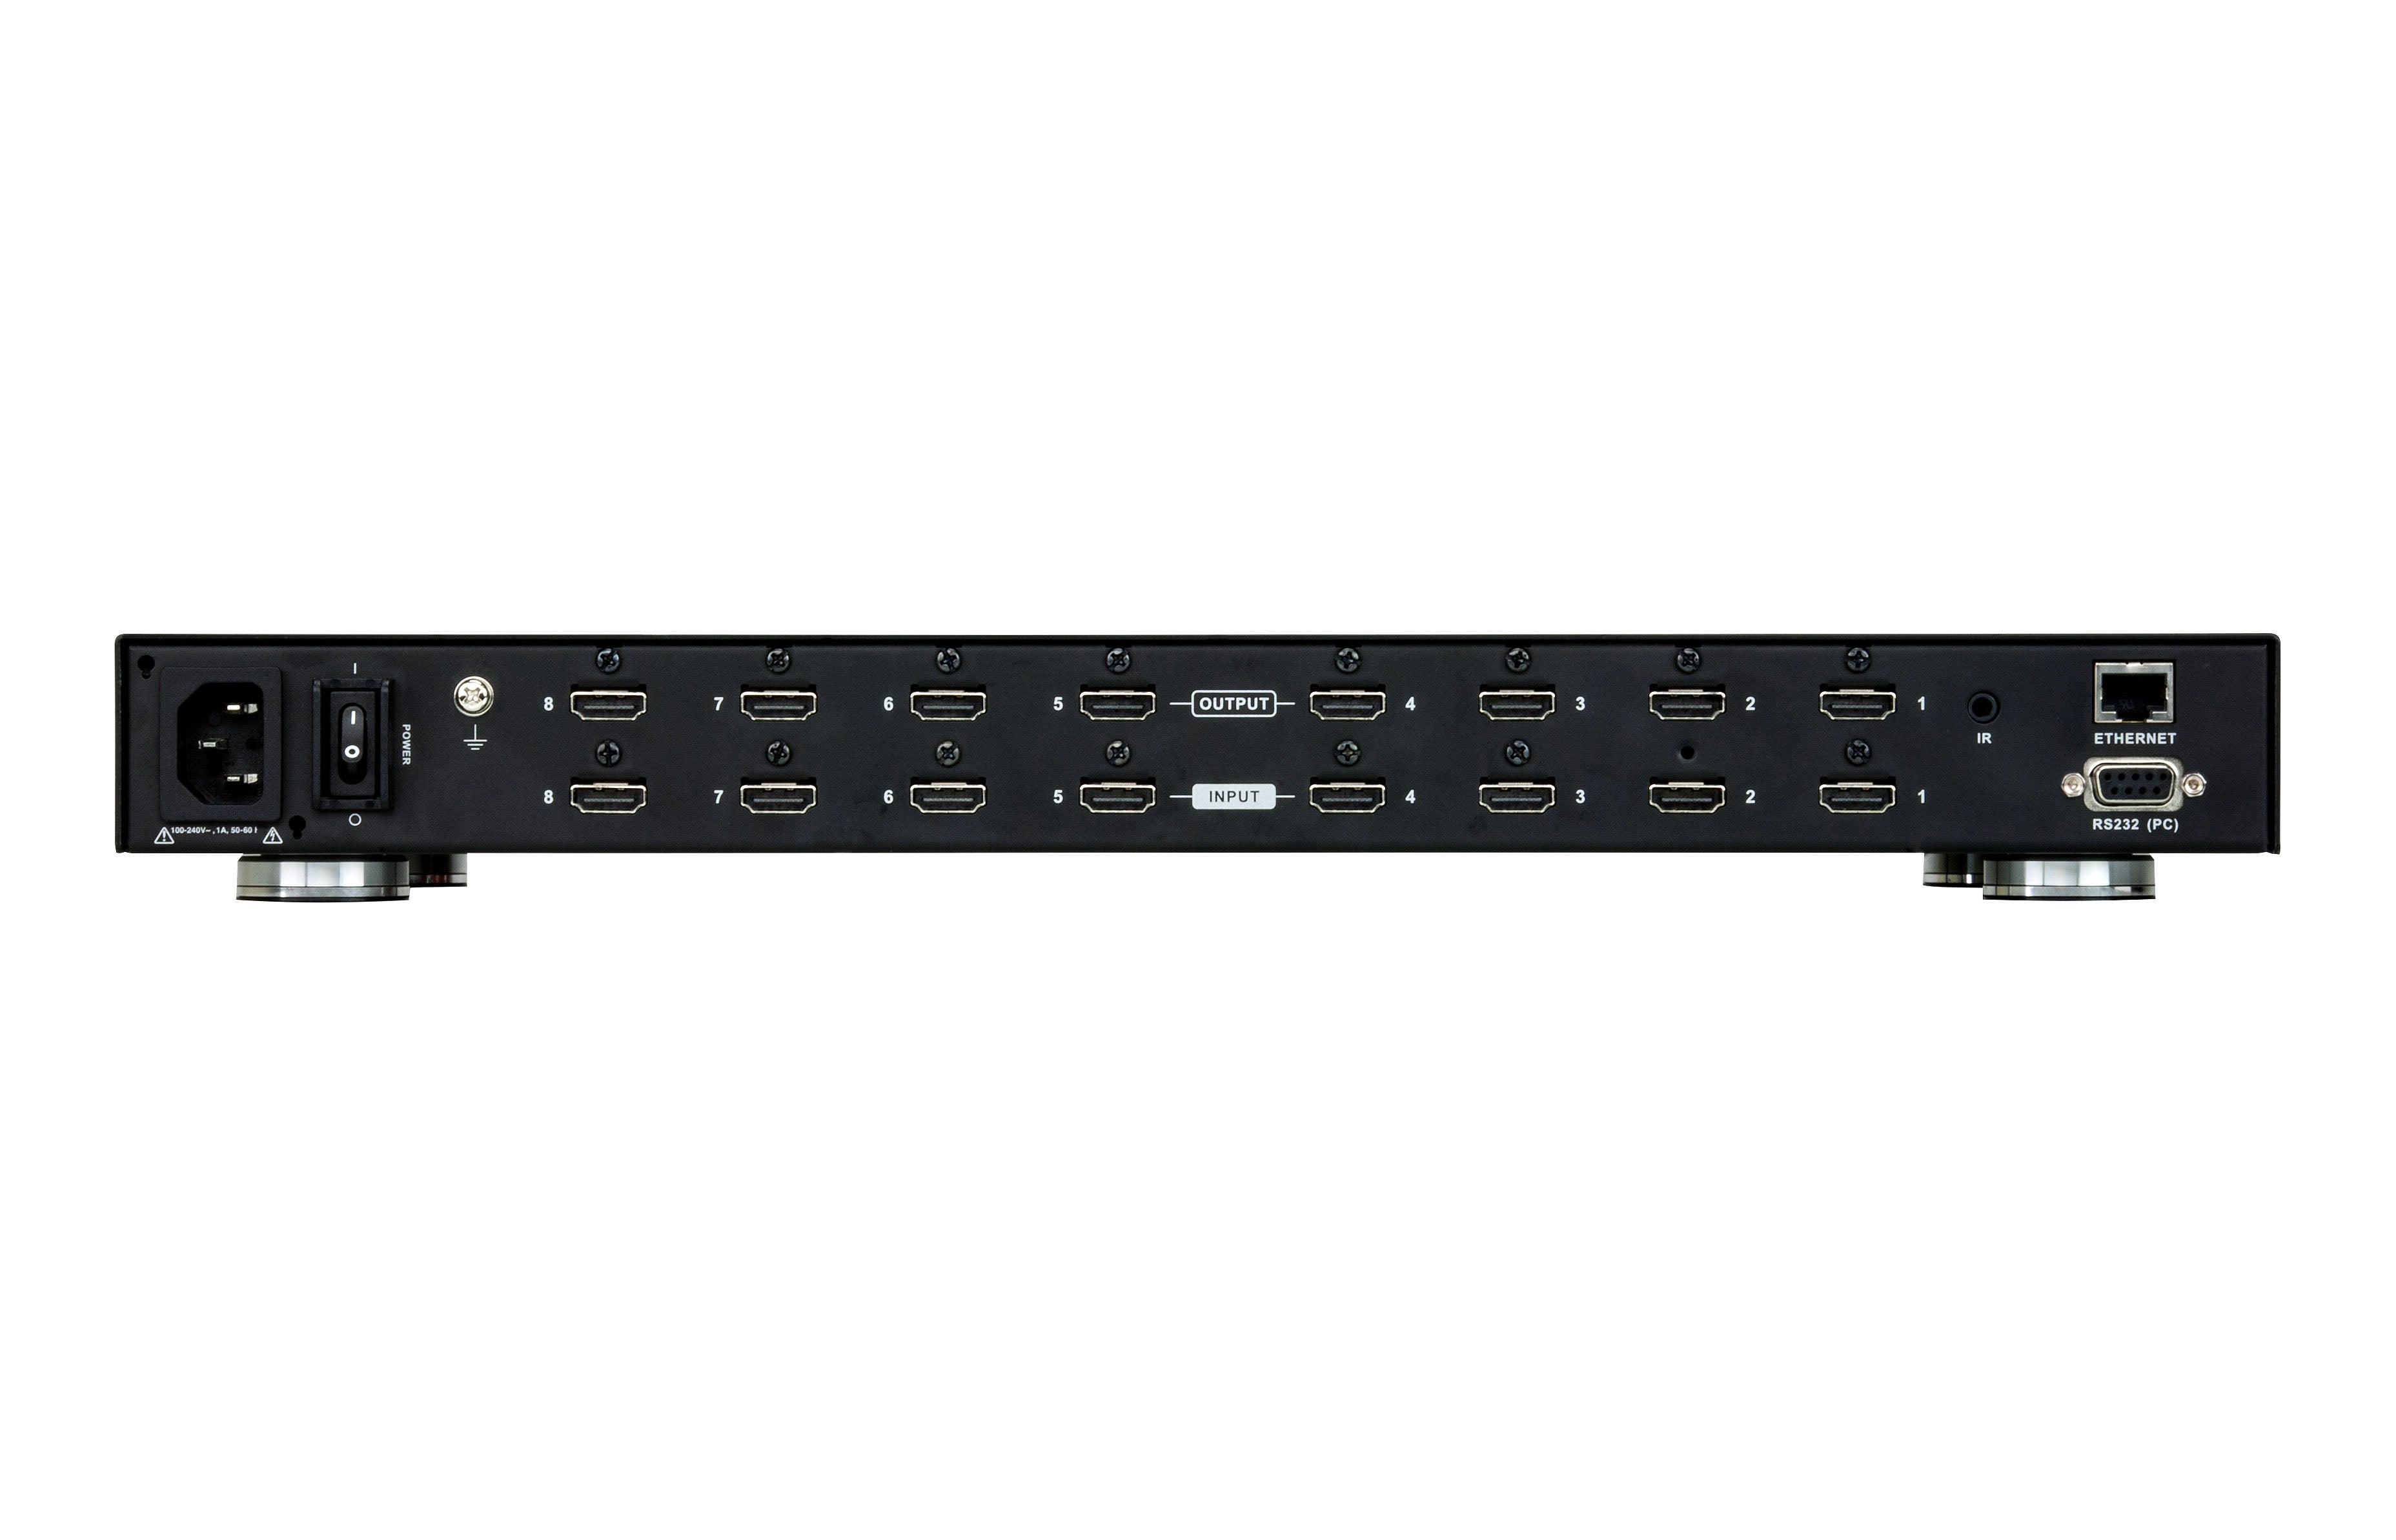 Aten 8 x 8 HDMI Matrix Switch with Scaler -VM5808H (3 Year Manufacture Local Warranty In Singapore)